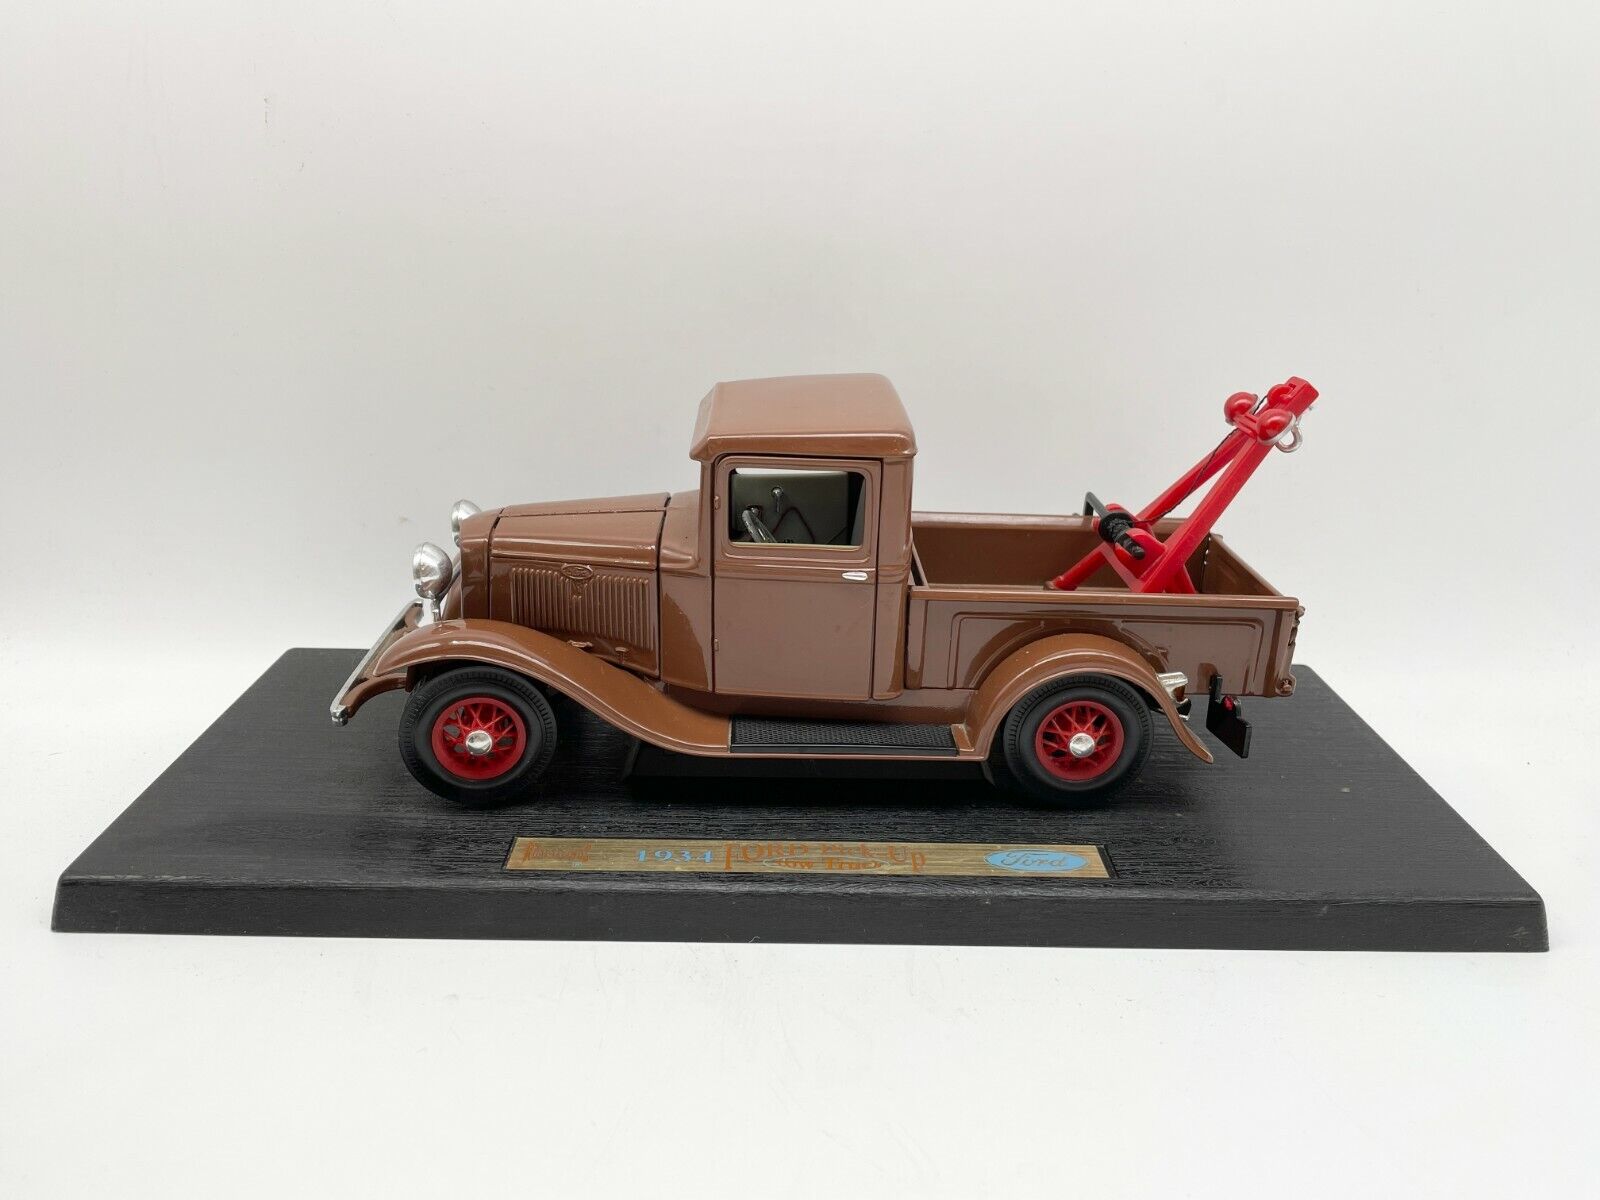 K13 Road Legends: 1934 Ford Pickup Wrecker Tow Truck Brown 1:18 Scale Diecast